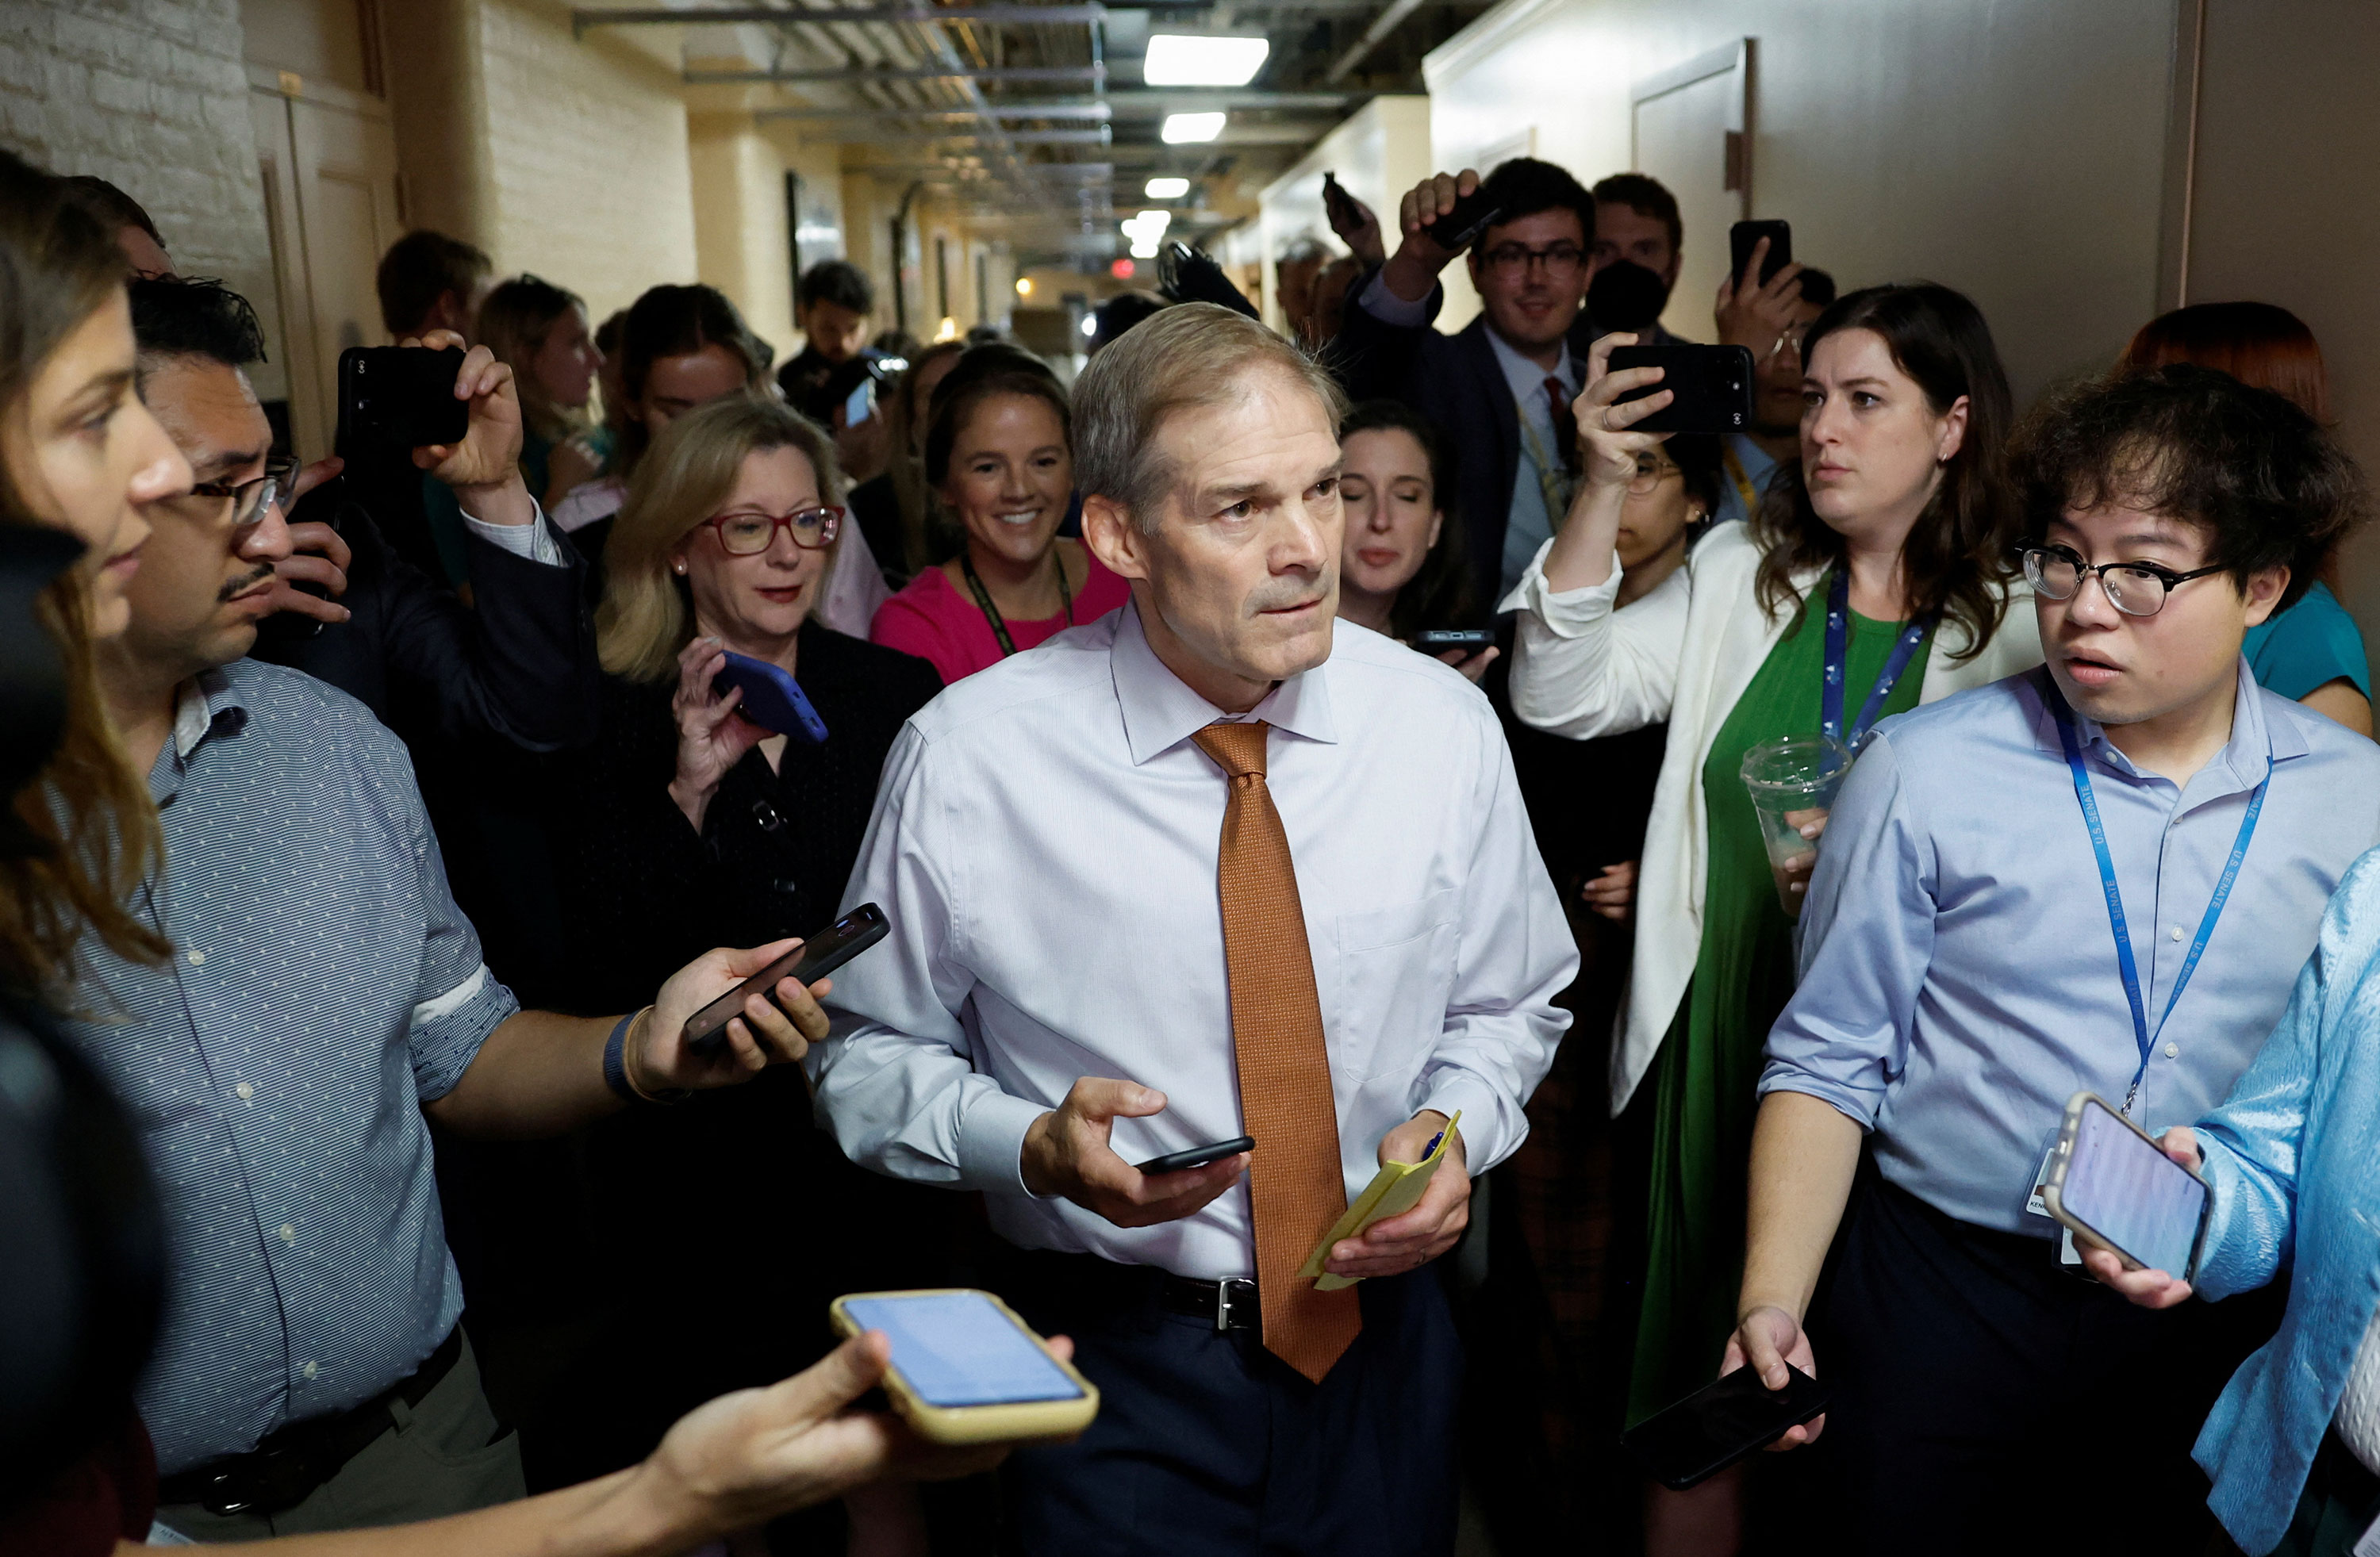 Rep. Jim Jordan arrives for a meeting with the Texas Republican House delegation on October 4, the morning after former Speaker of the House Kevin McCarthy was ousted from the position.